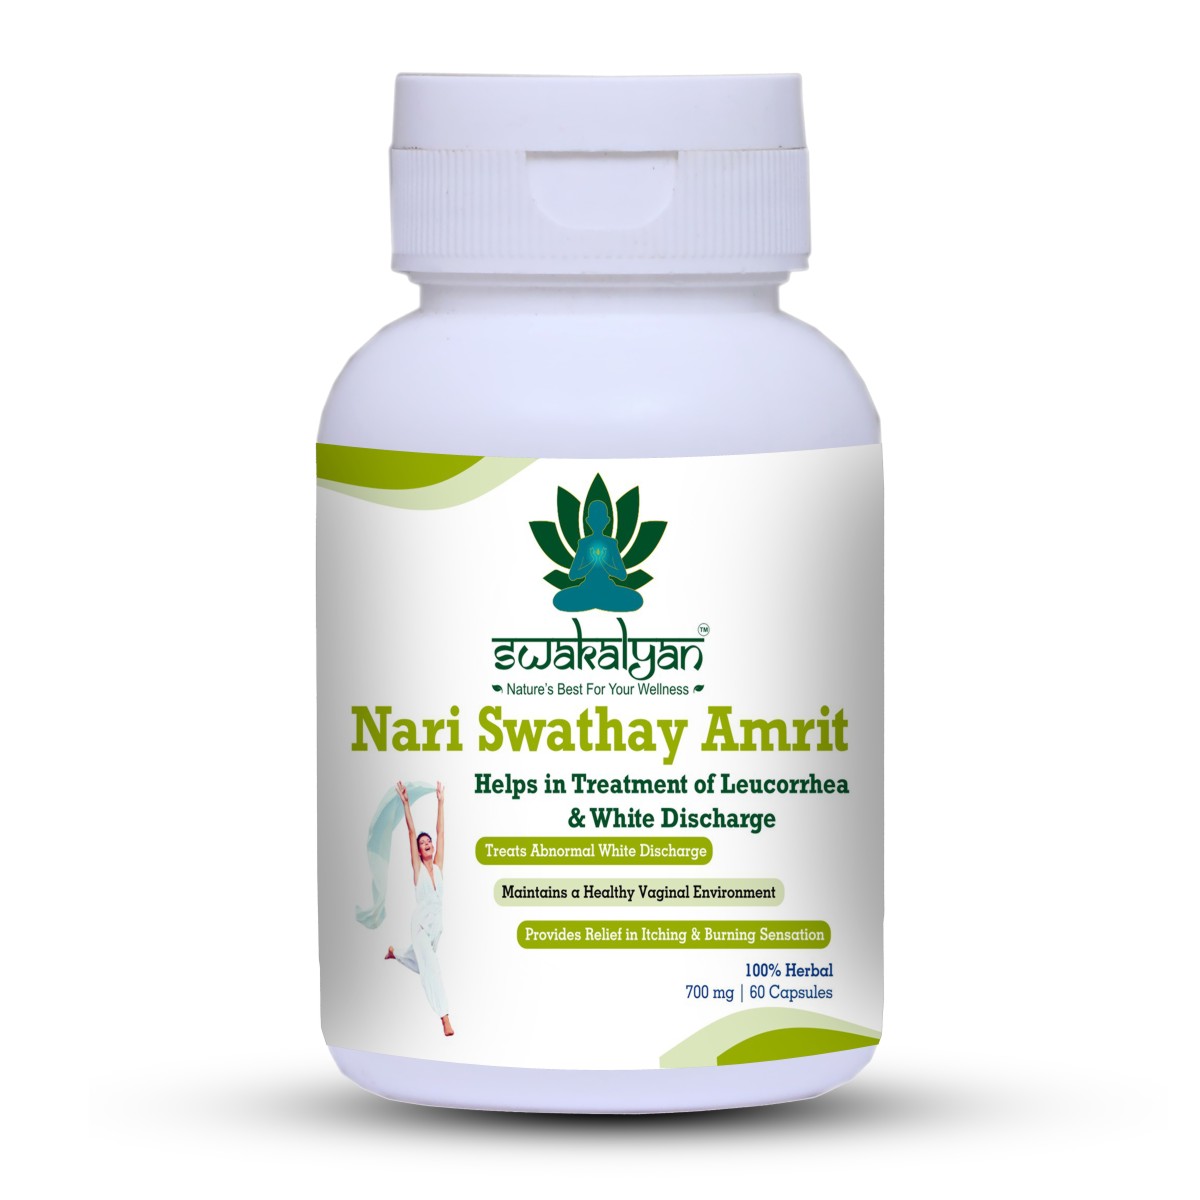 Buy Swakalyan Nari Swasthay Amrit -Helps in the treatment of leucorrhoea & White Discharge at Best Price Online